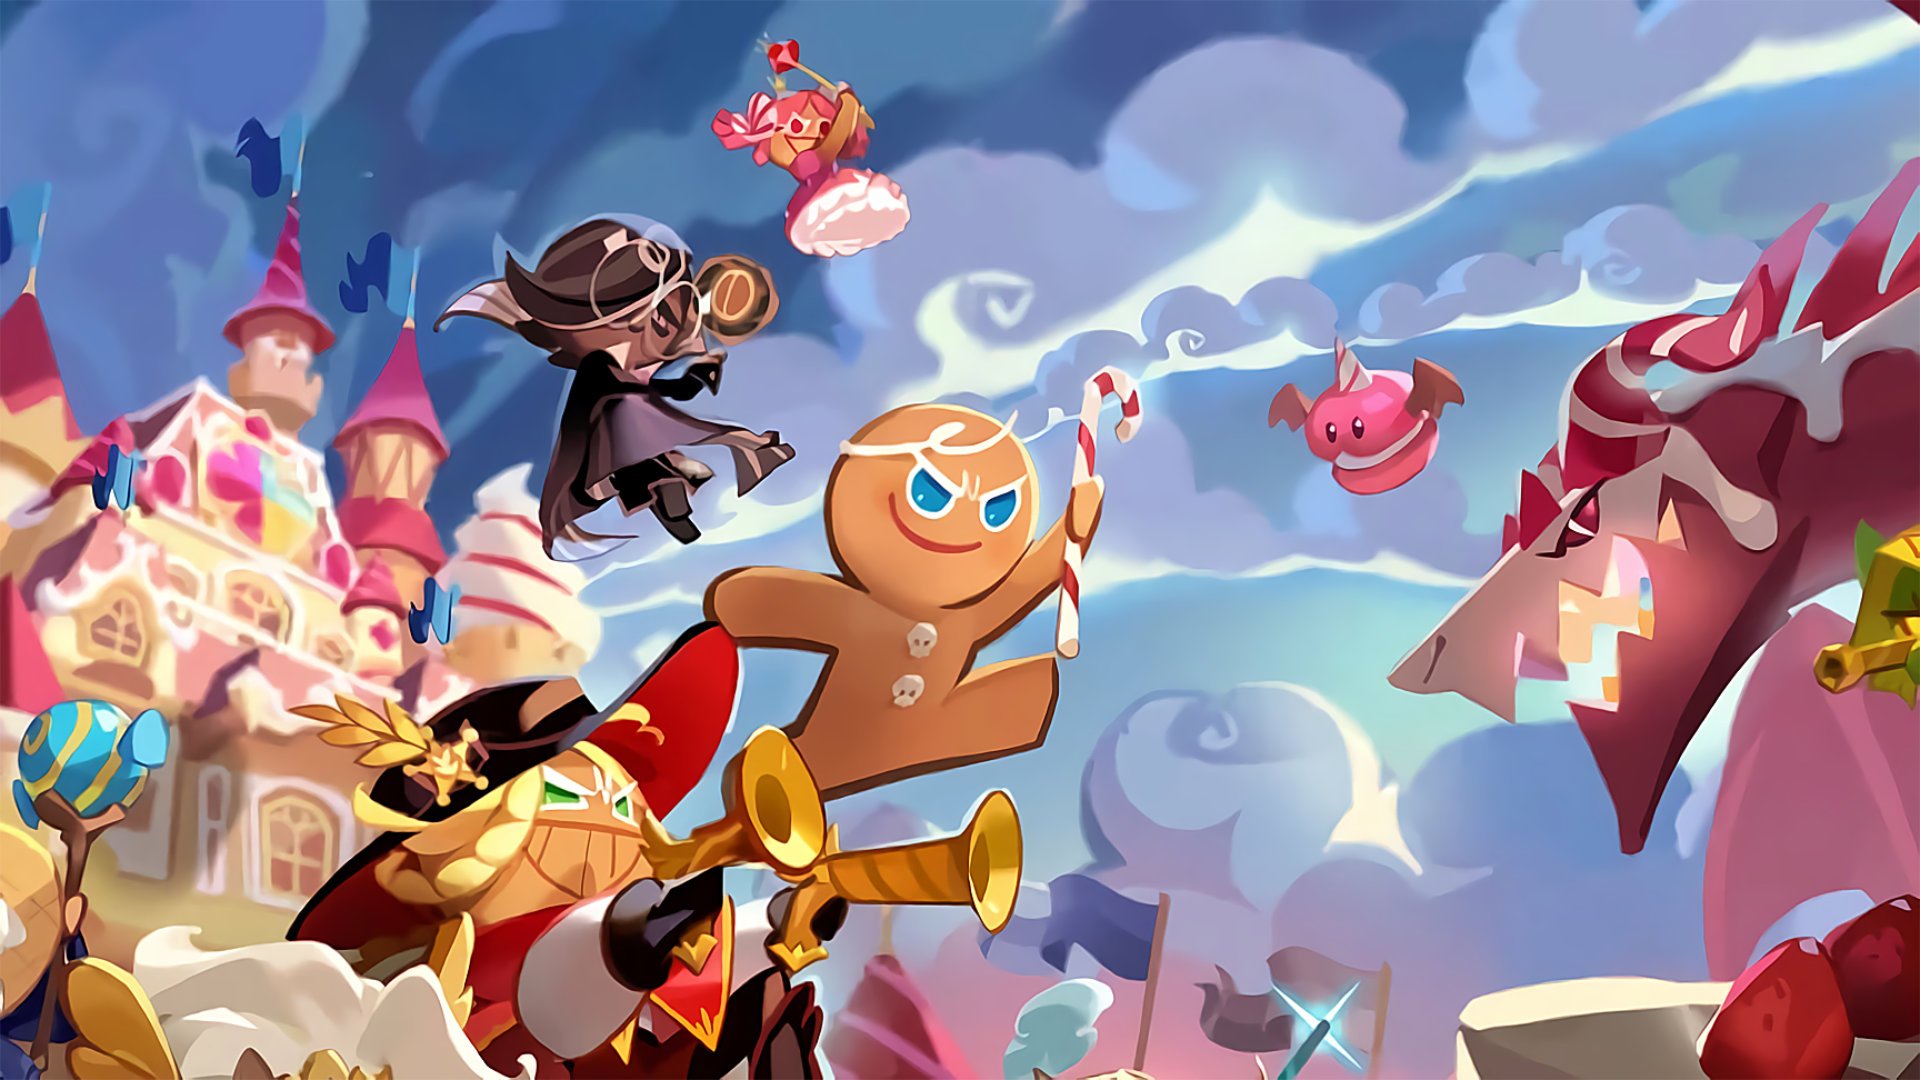 Get Details Download New BTS Cookie Run Kingdom Mobile Game Collab   Rolling Stone